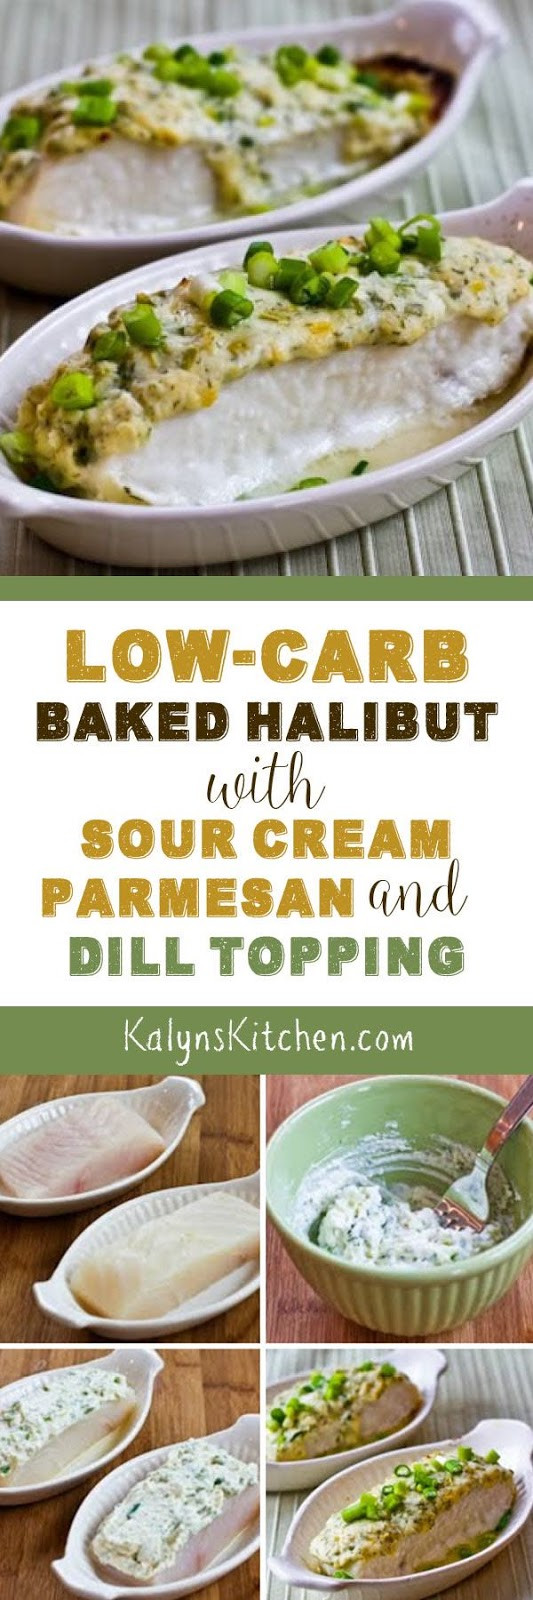 Low Carb Sour Cream Recipes
 Low Carb Baked Halibut with Sour Cream Parmesan and Dill